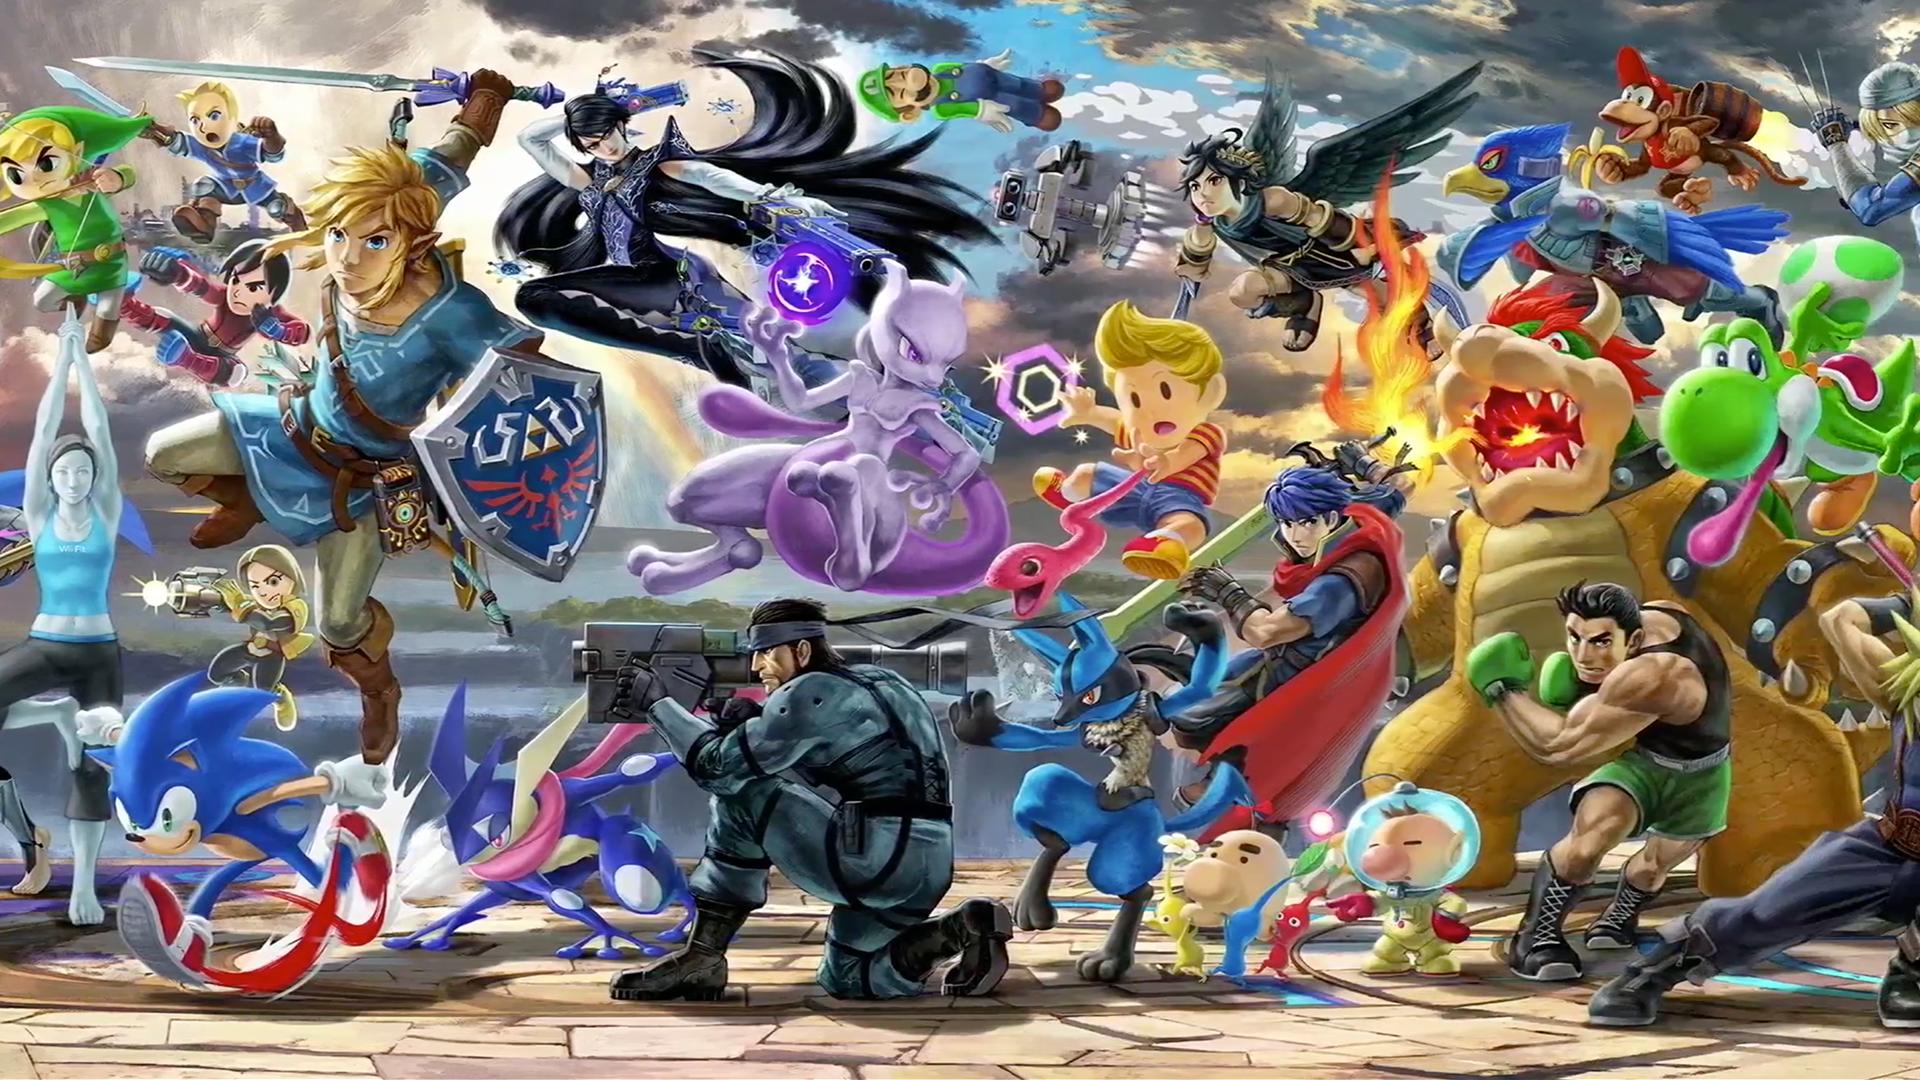 Super Smash Bros Ultimate character unlock guide and Smash Bros character  list